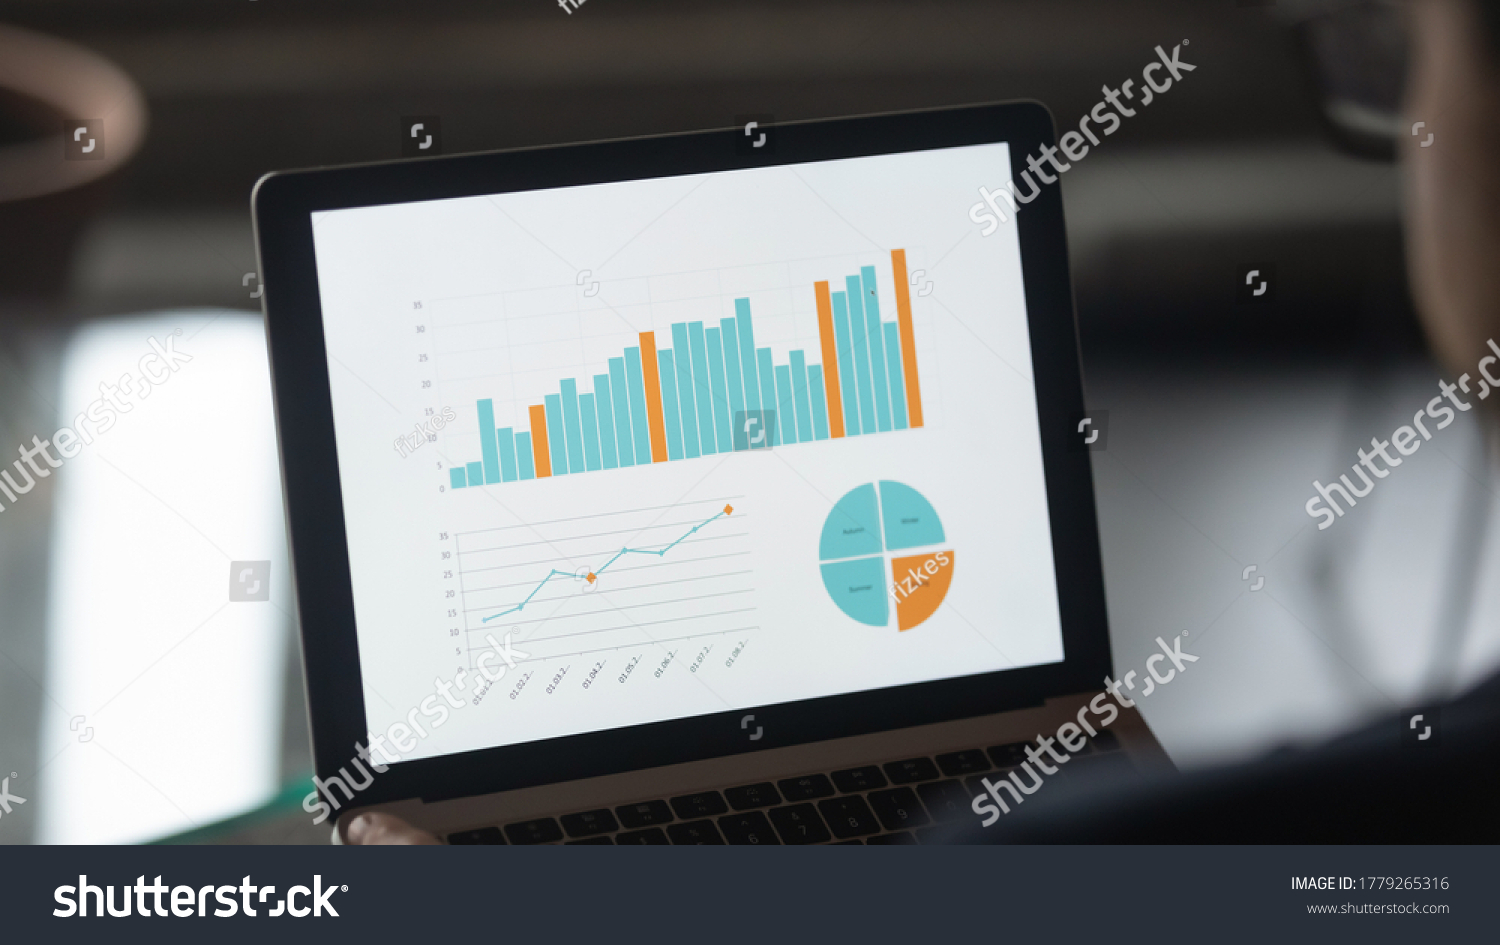 Close up view of laptop screen with financial diagram project statistics, colorful company graphs computer gadget monitor, person look at device analyze corporate finances online, economics concept #1779265316